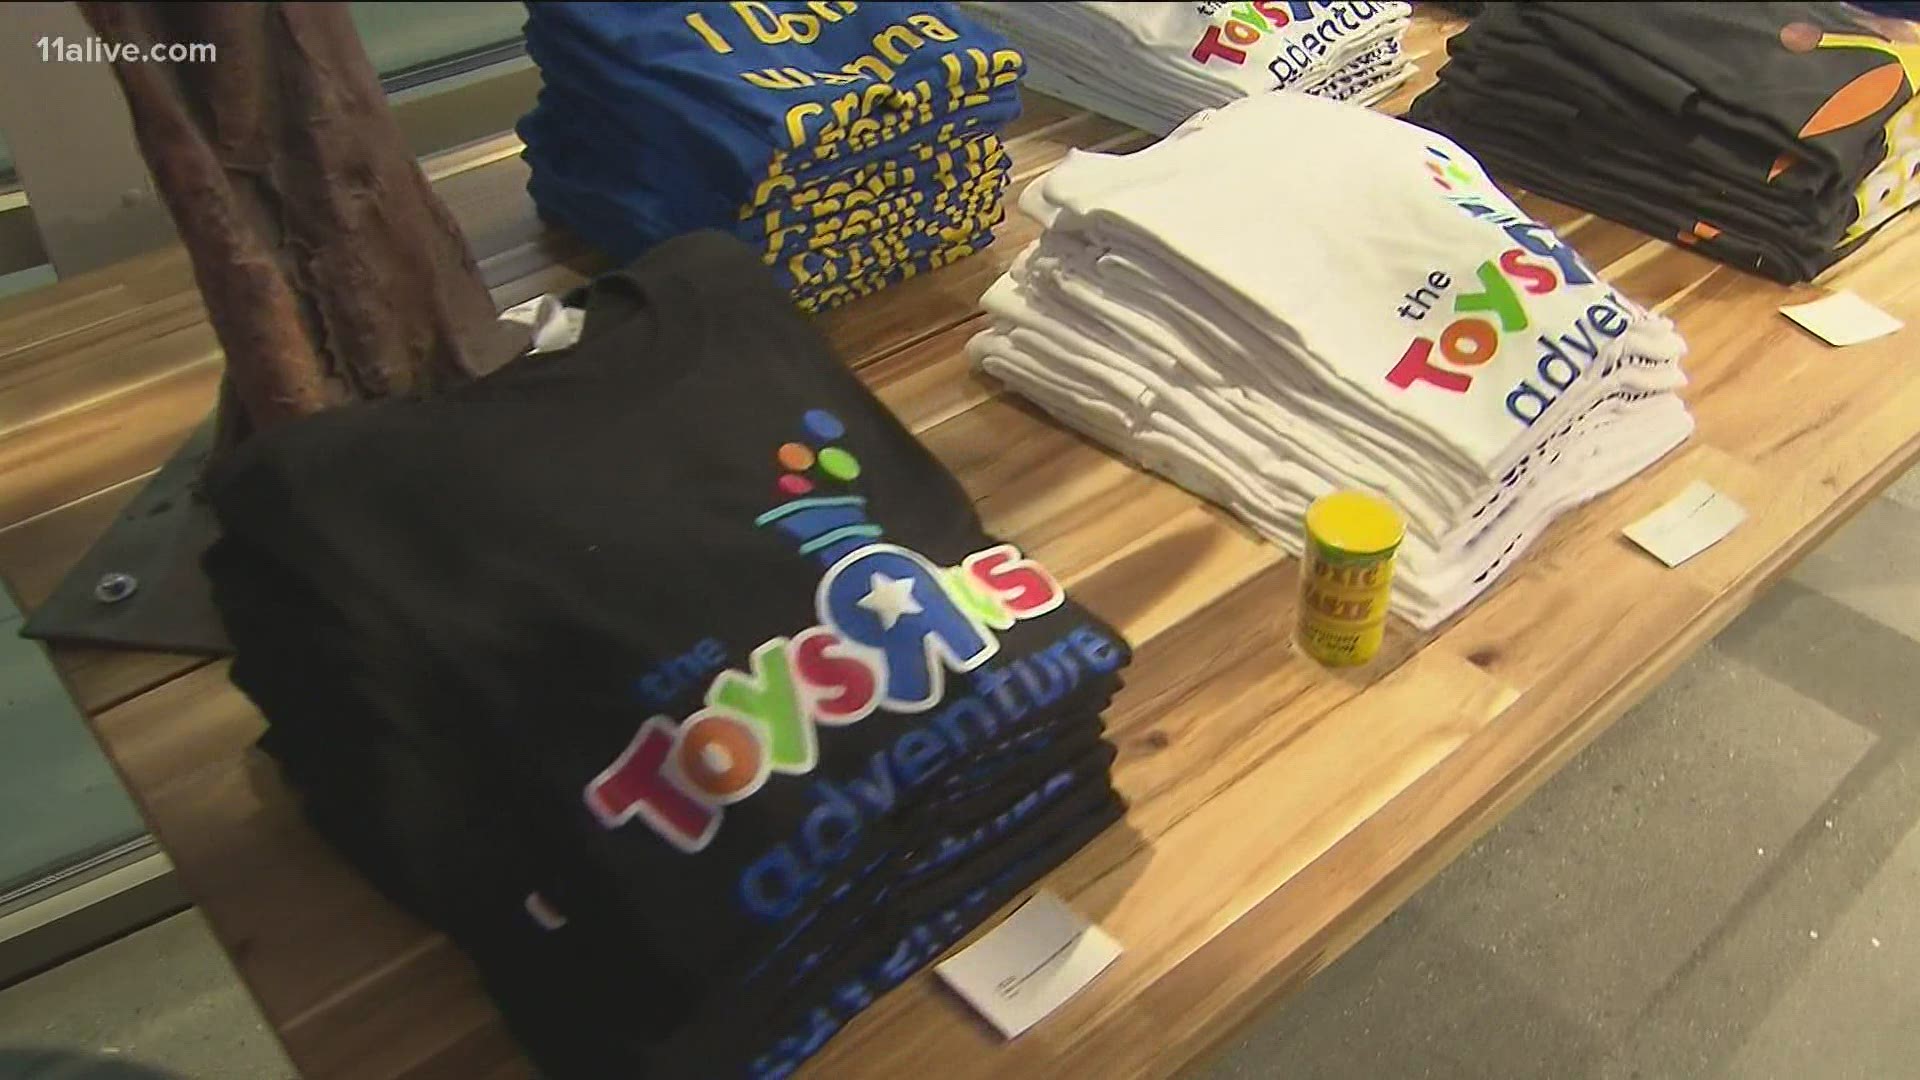 Toys 'R' Us closes last two US stores as comeback falters